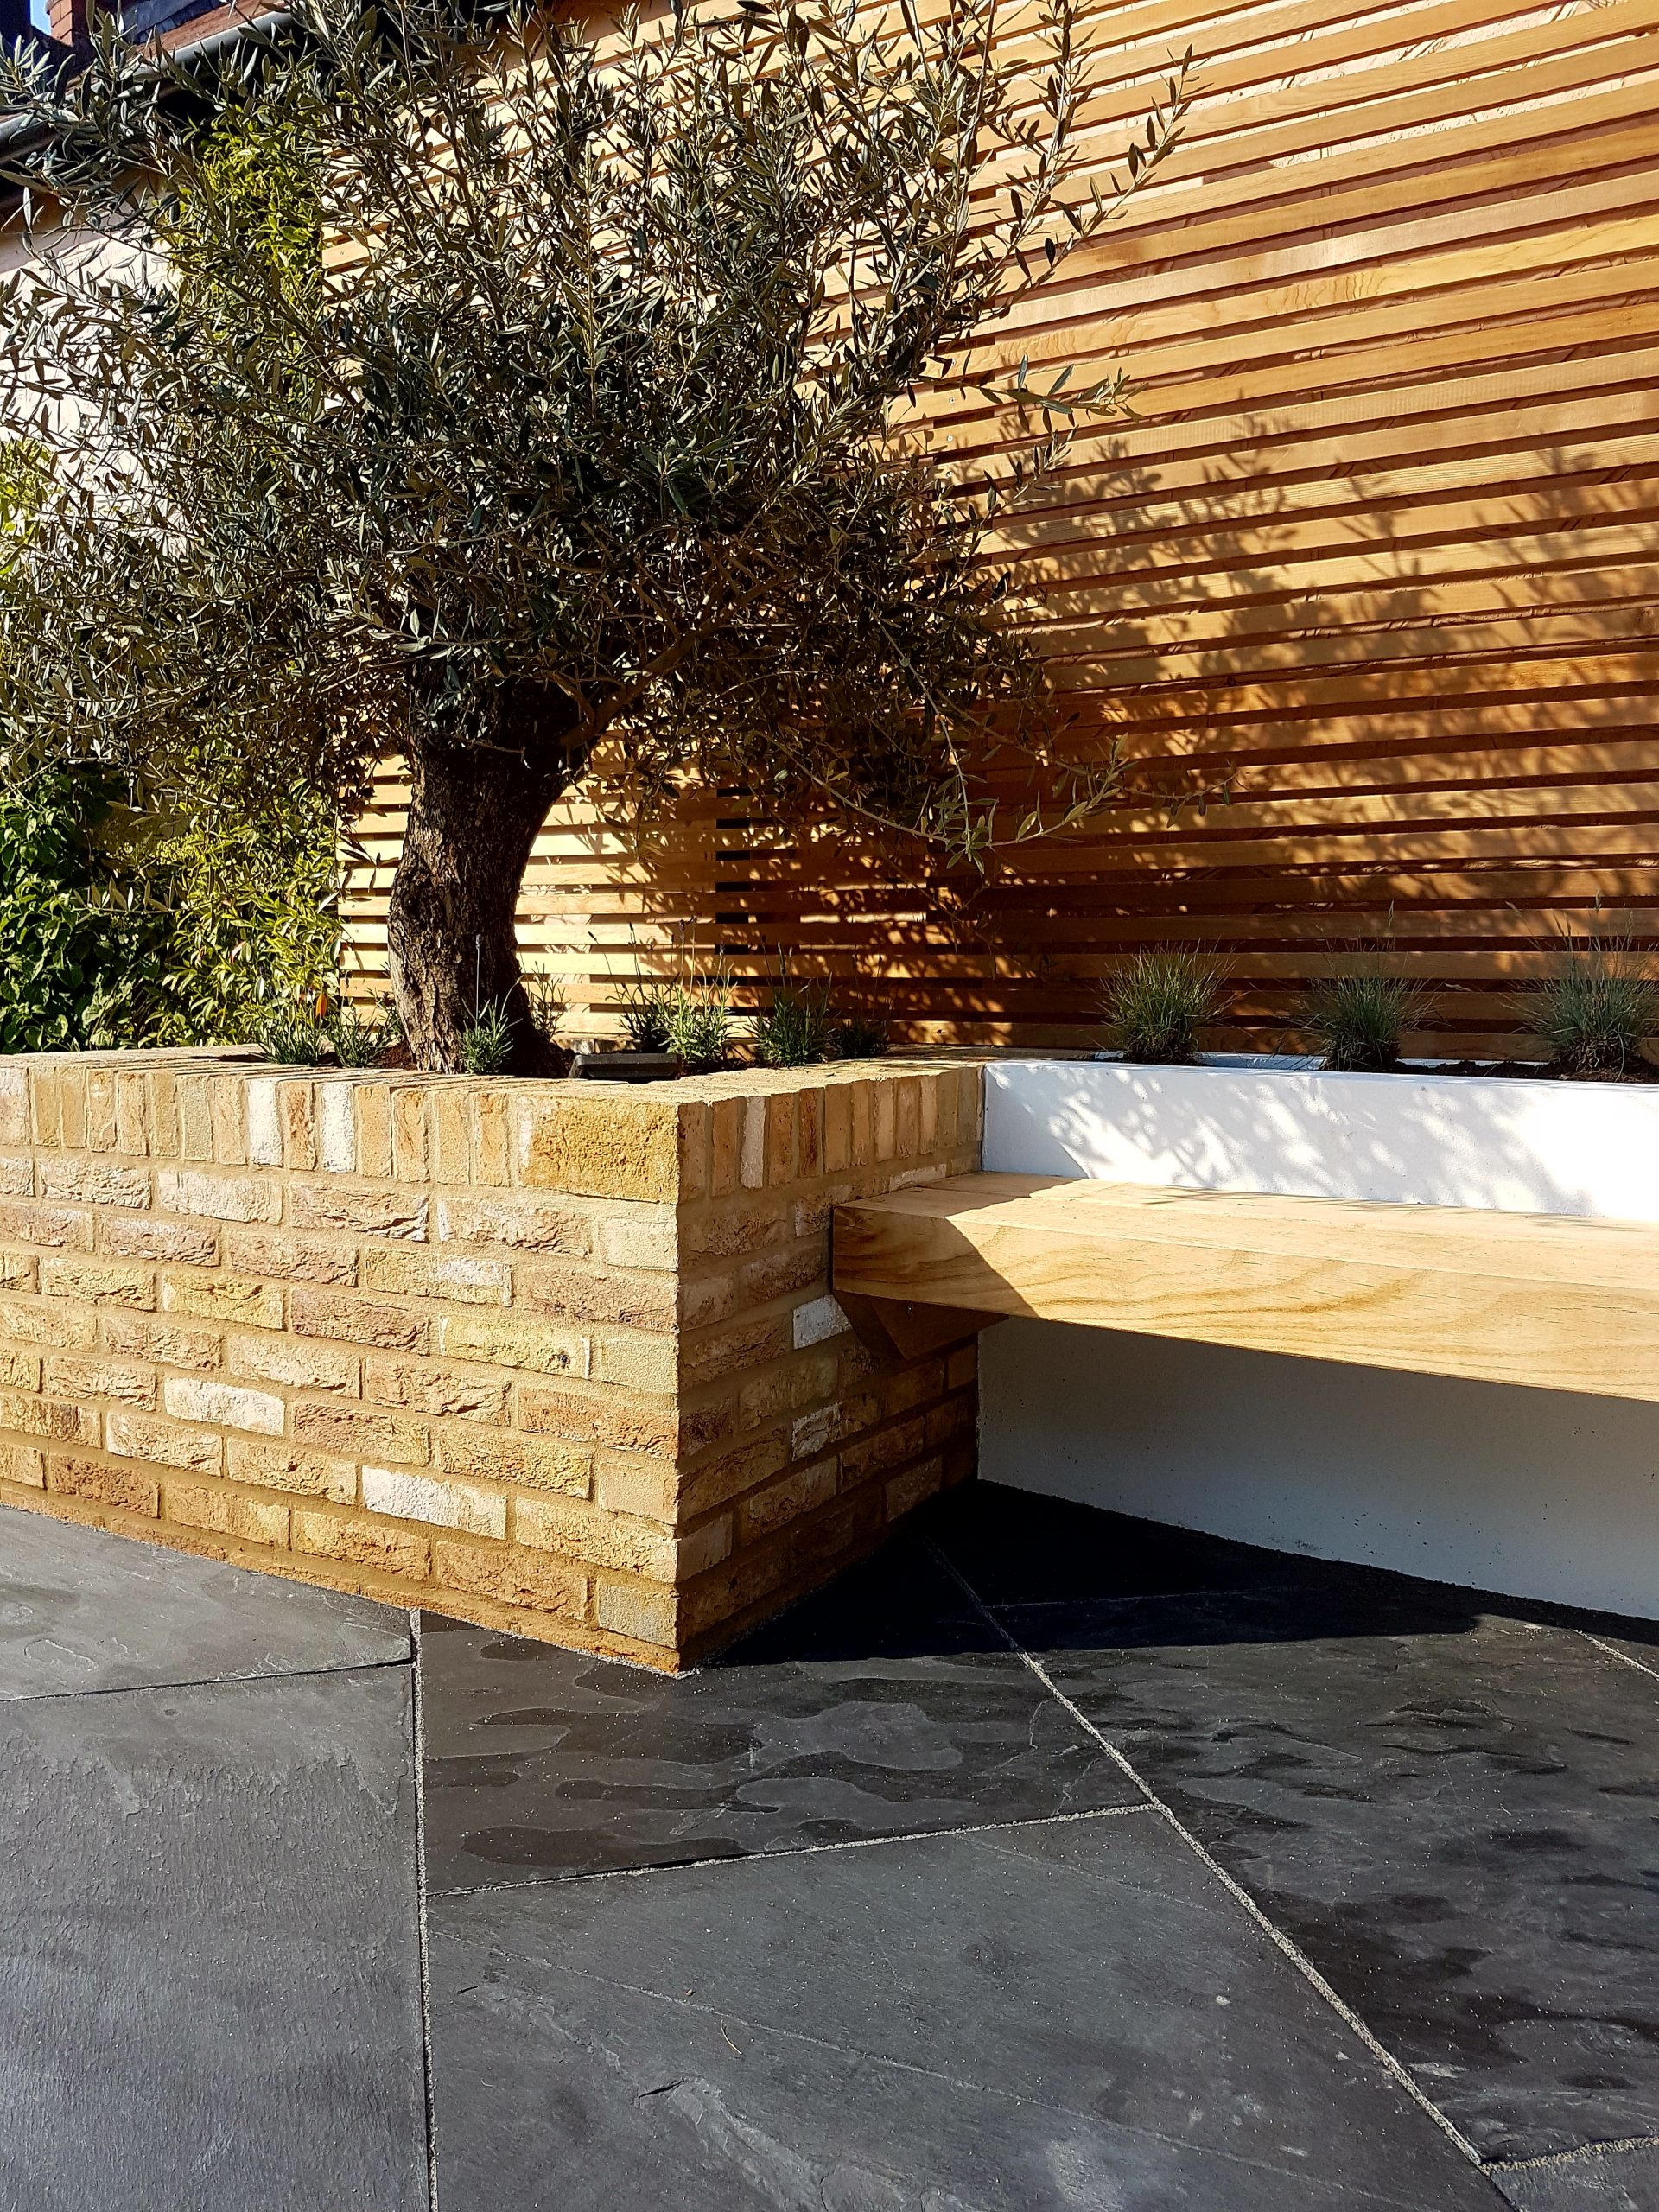 Cantilevered bench on rendered wall next to raised tree pit faced with outdoor wall cladding of facing bricks.